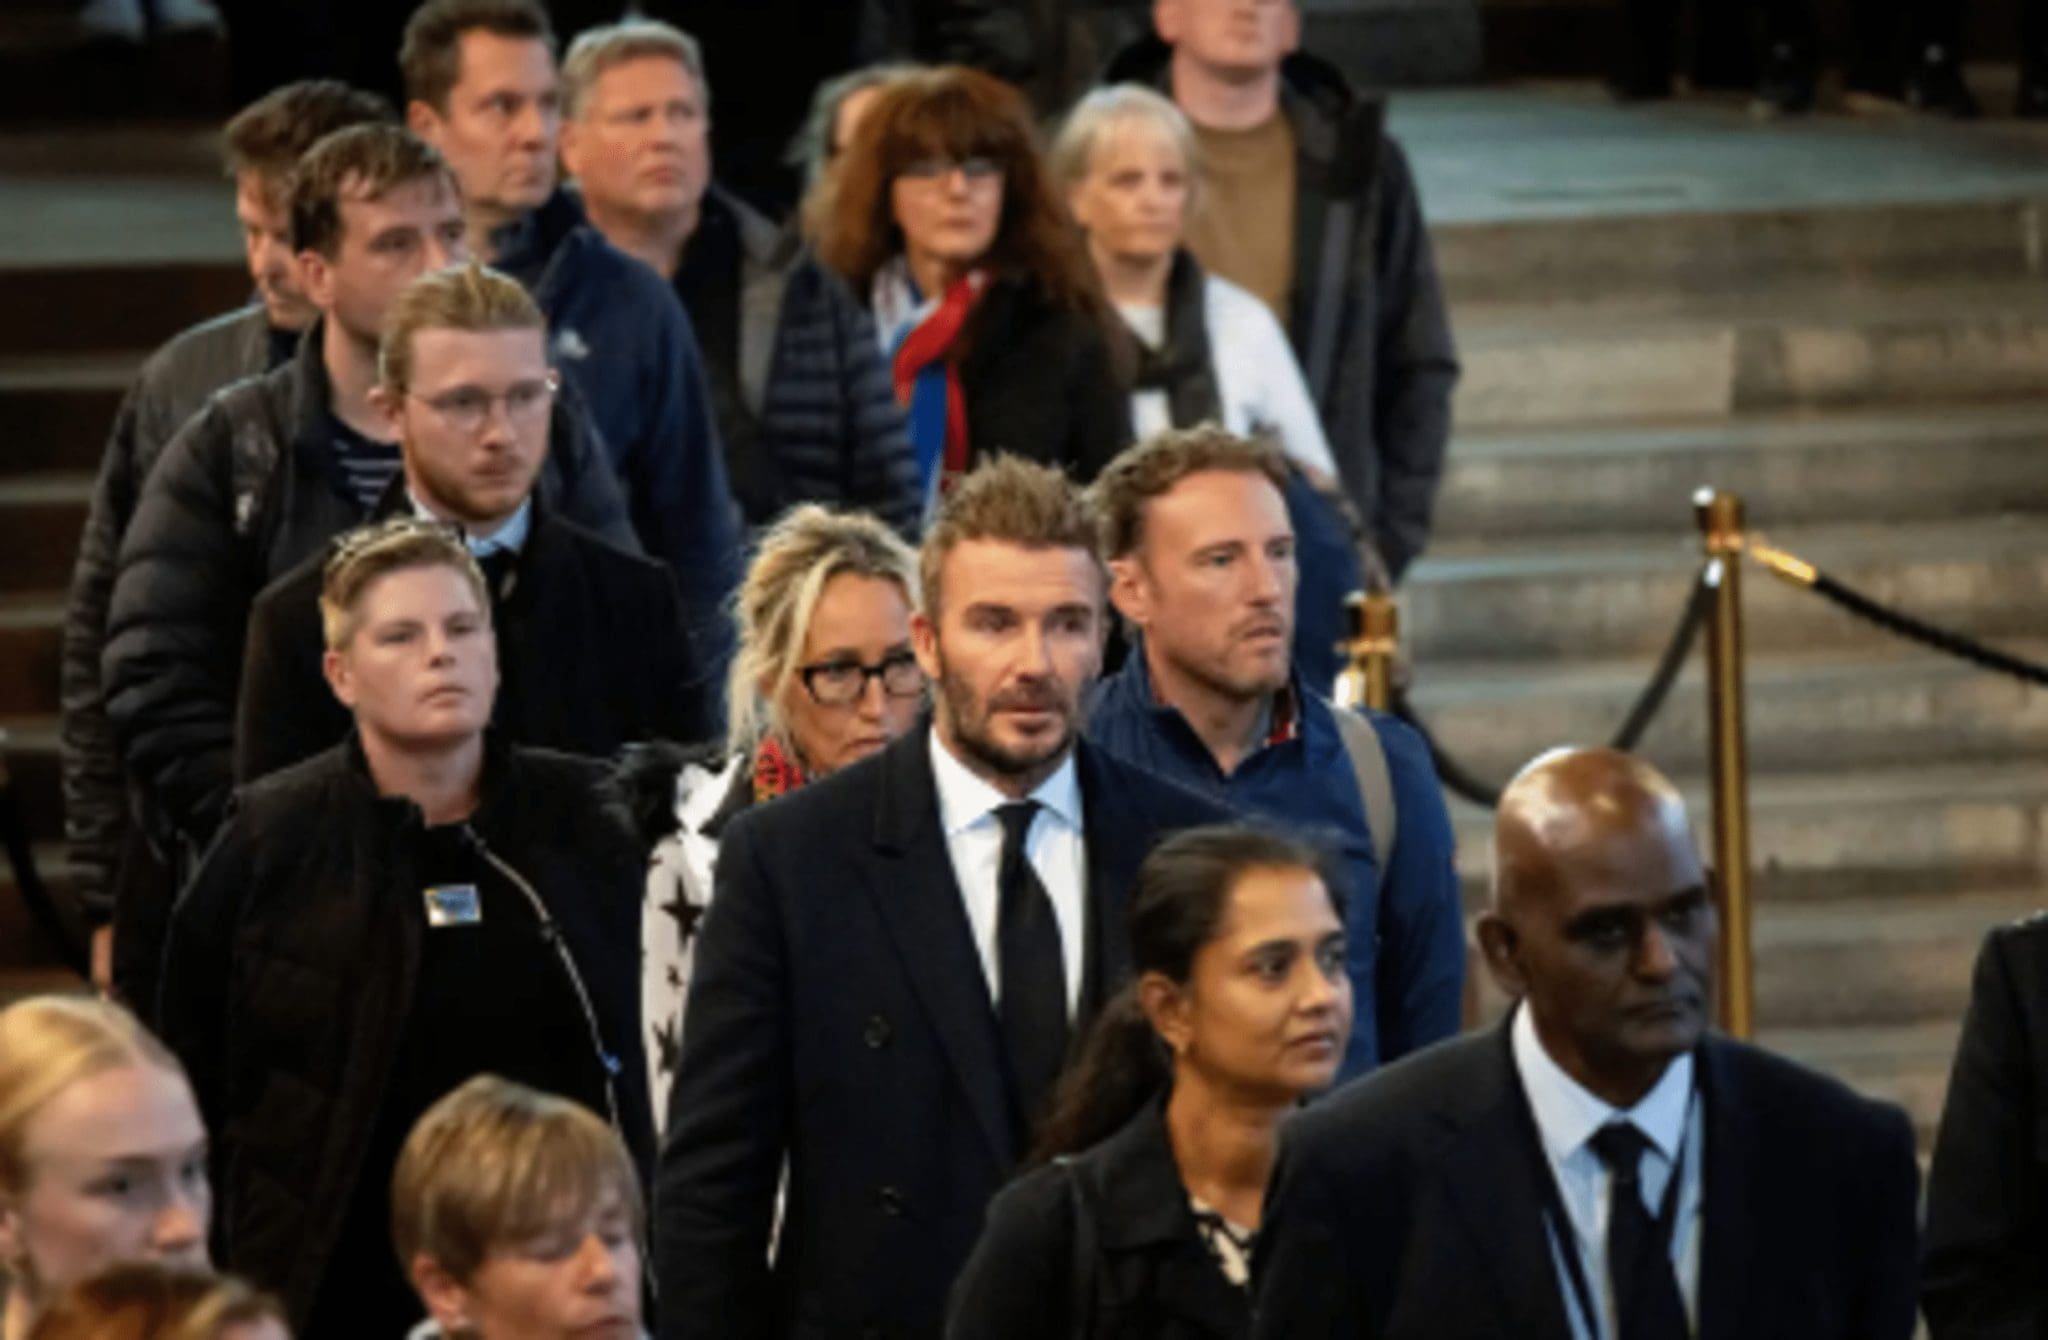 After Queen Elizabeth's Funeral, David Beckham Spoke Highly Of The Royal Family's Love And Compassion